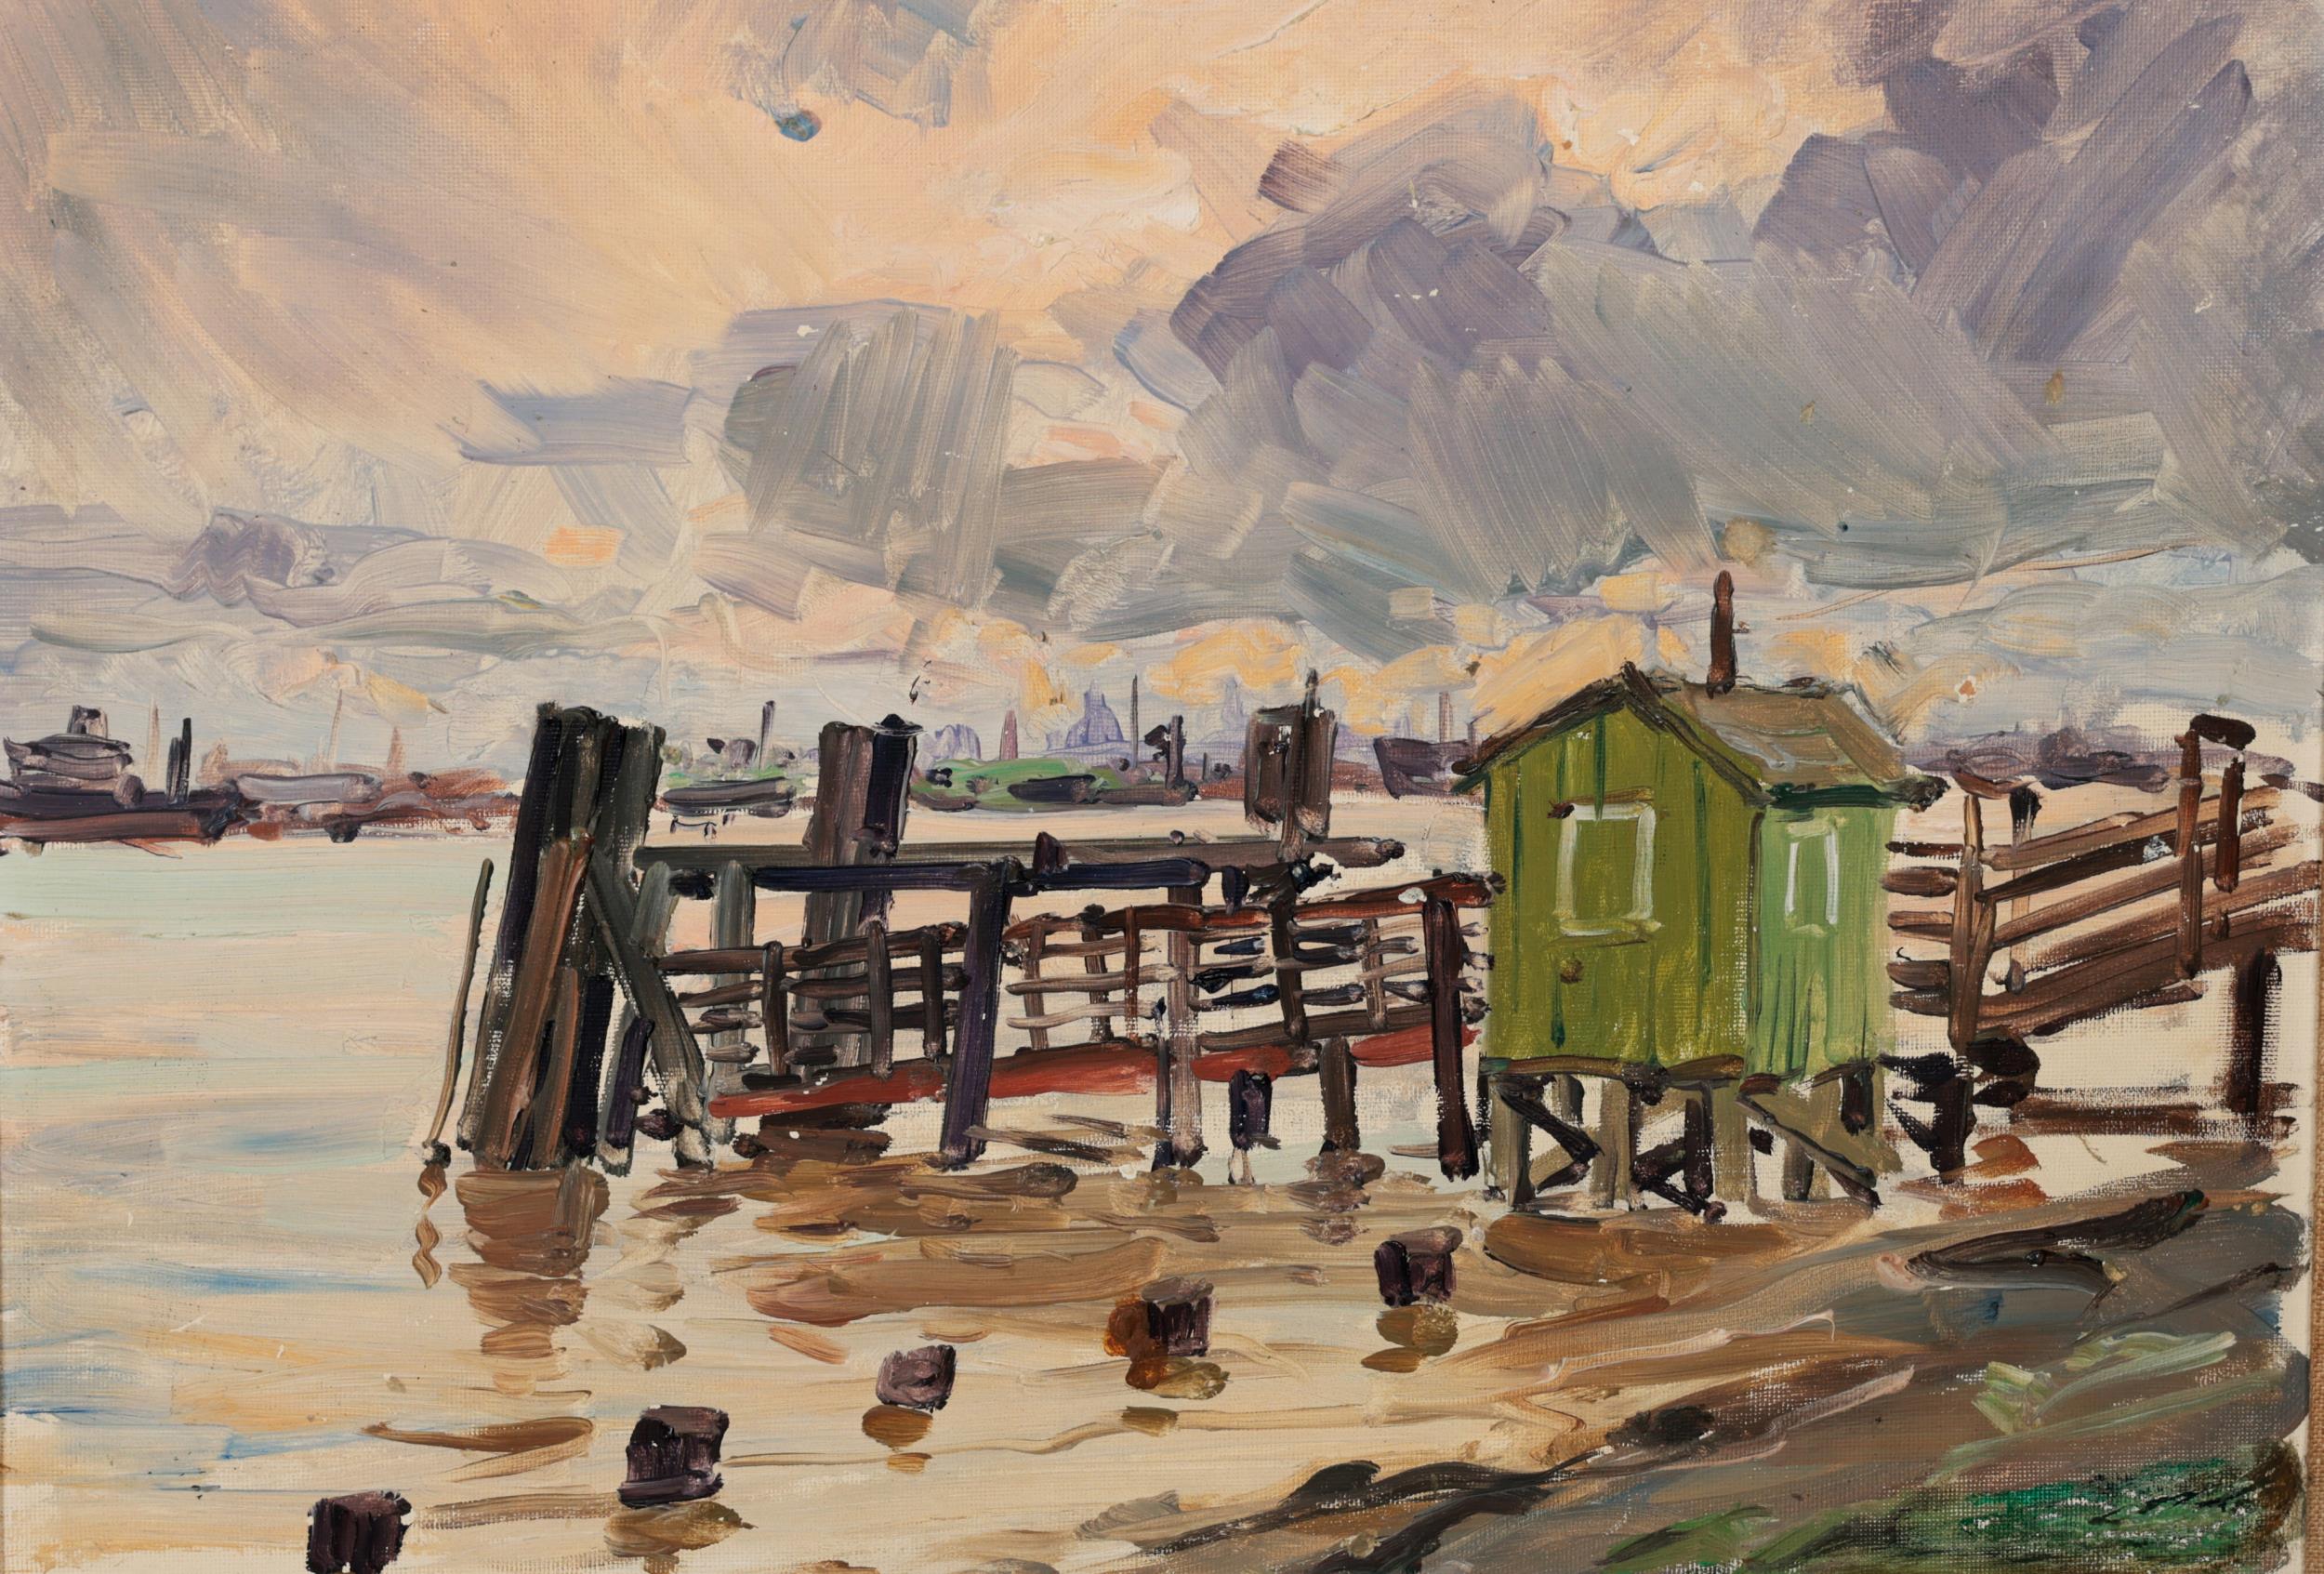 Attributed to John Singer Sargent, American (1856-1925) "The Pier," O.O.B., coastal scene with